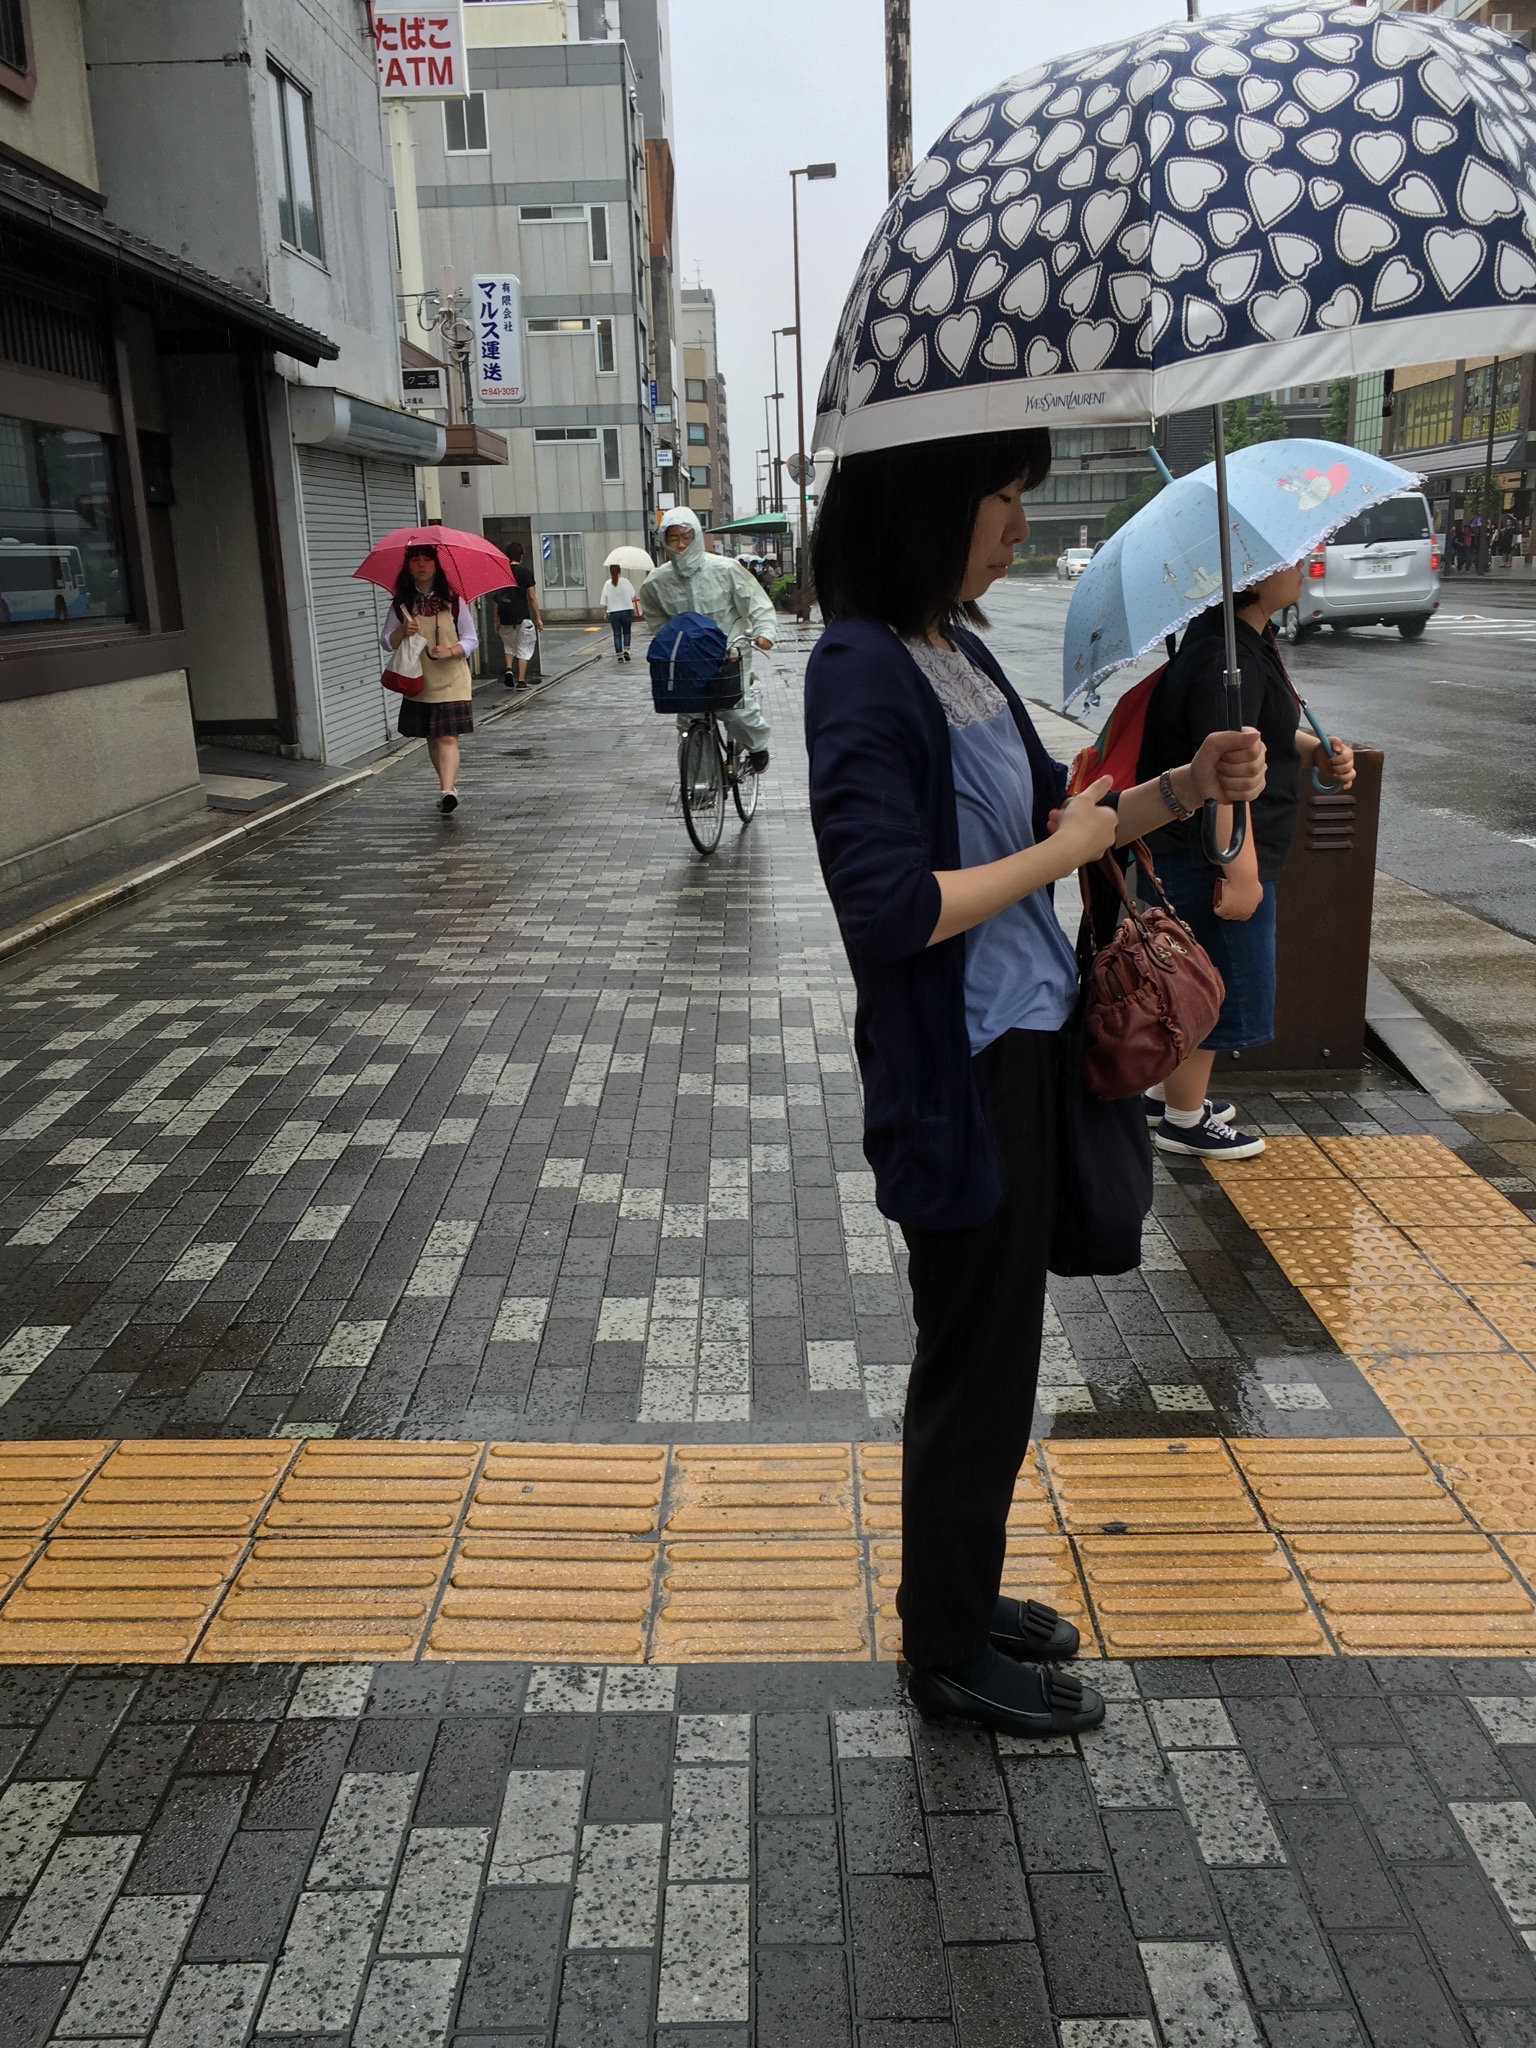 With rain comes umbrellas of many sizes and colours. They make negotiating the streets more challenging, especially with the bikes still weaving in-between the pedestrians. When they have umbrellas as well, such as in the image above, the space becomes even more limited.